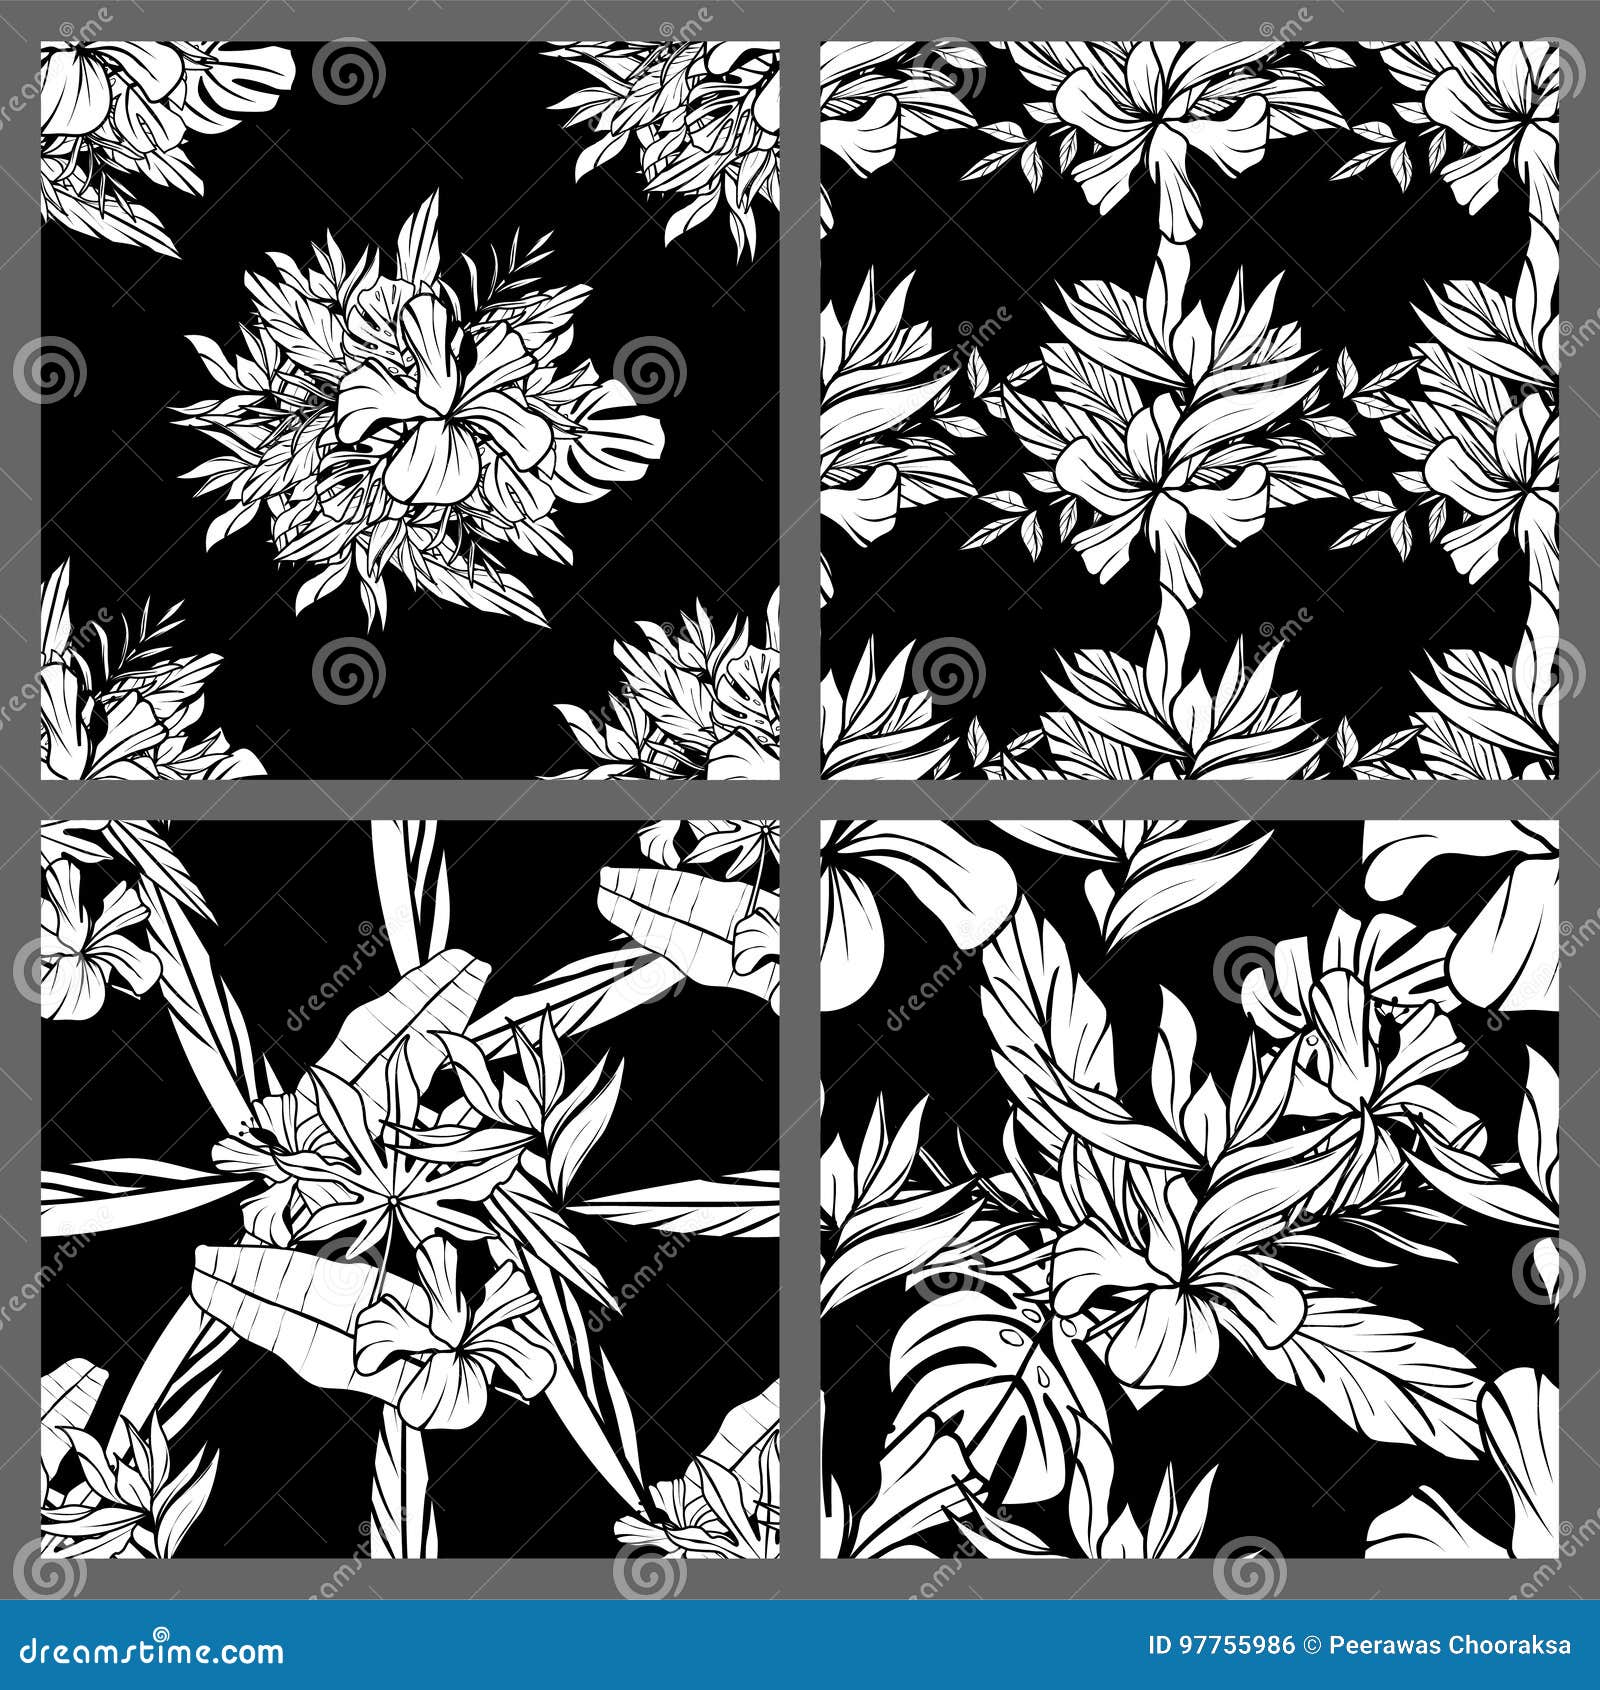 Black and White Seamless Tropical Leaves Floral Vector Pattern